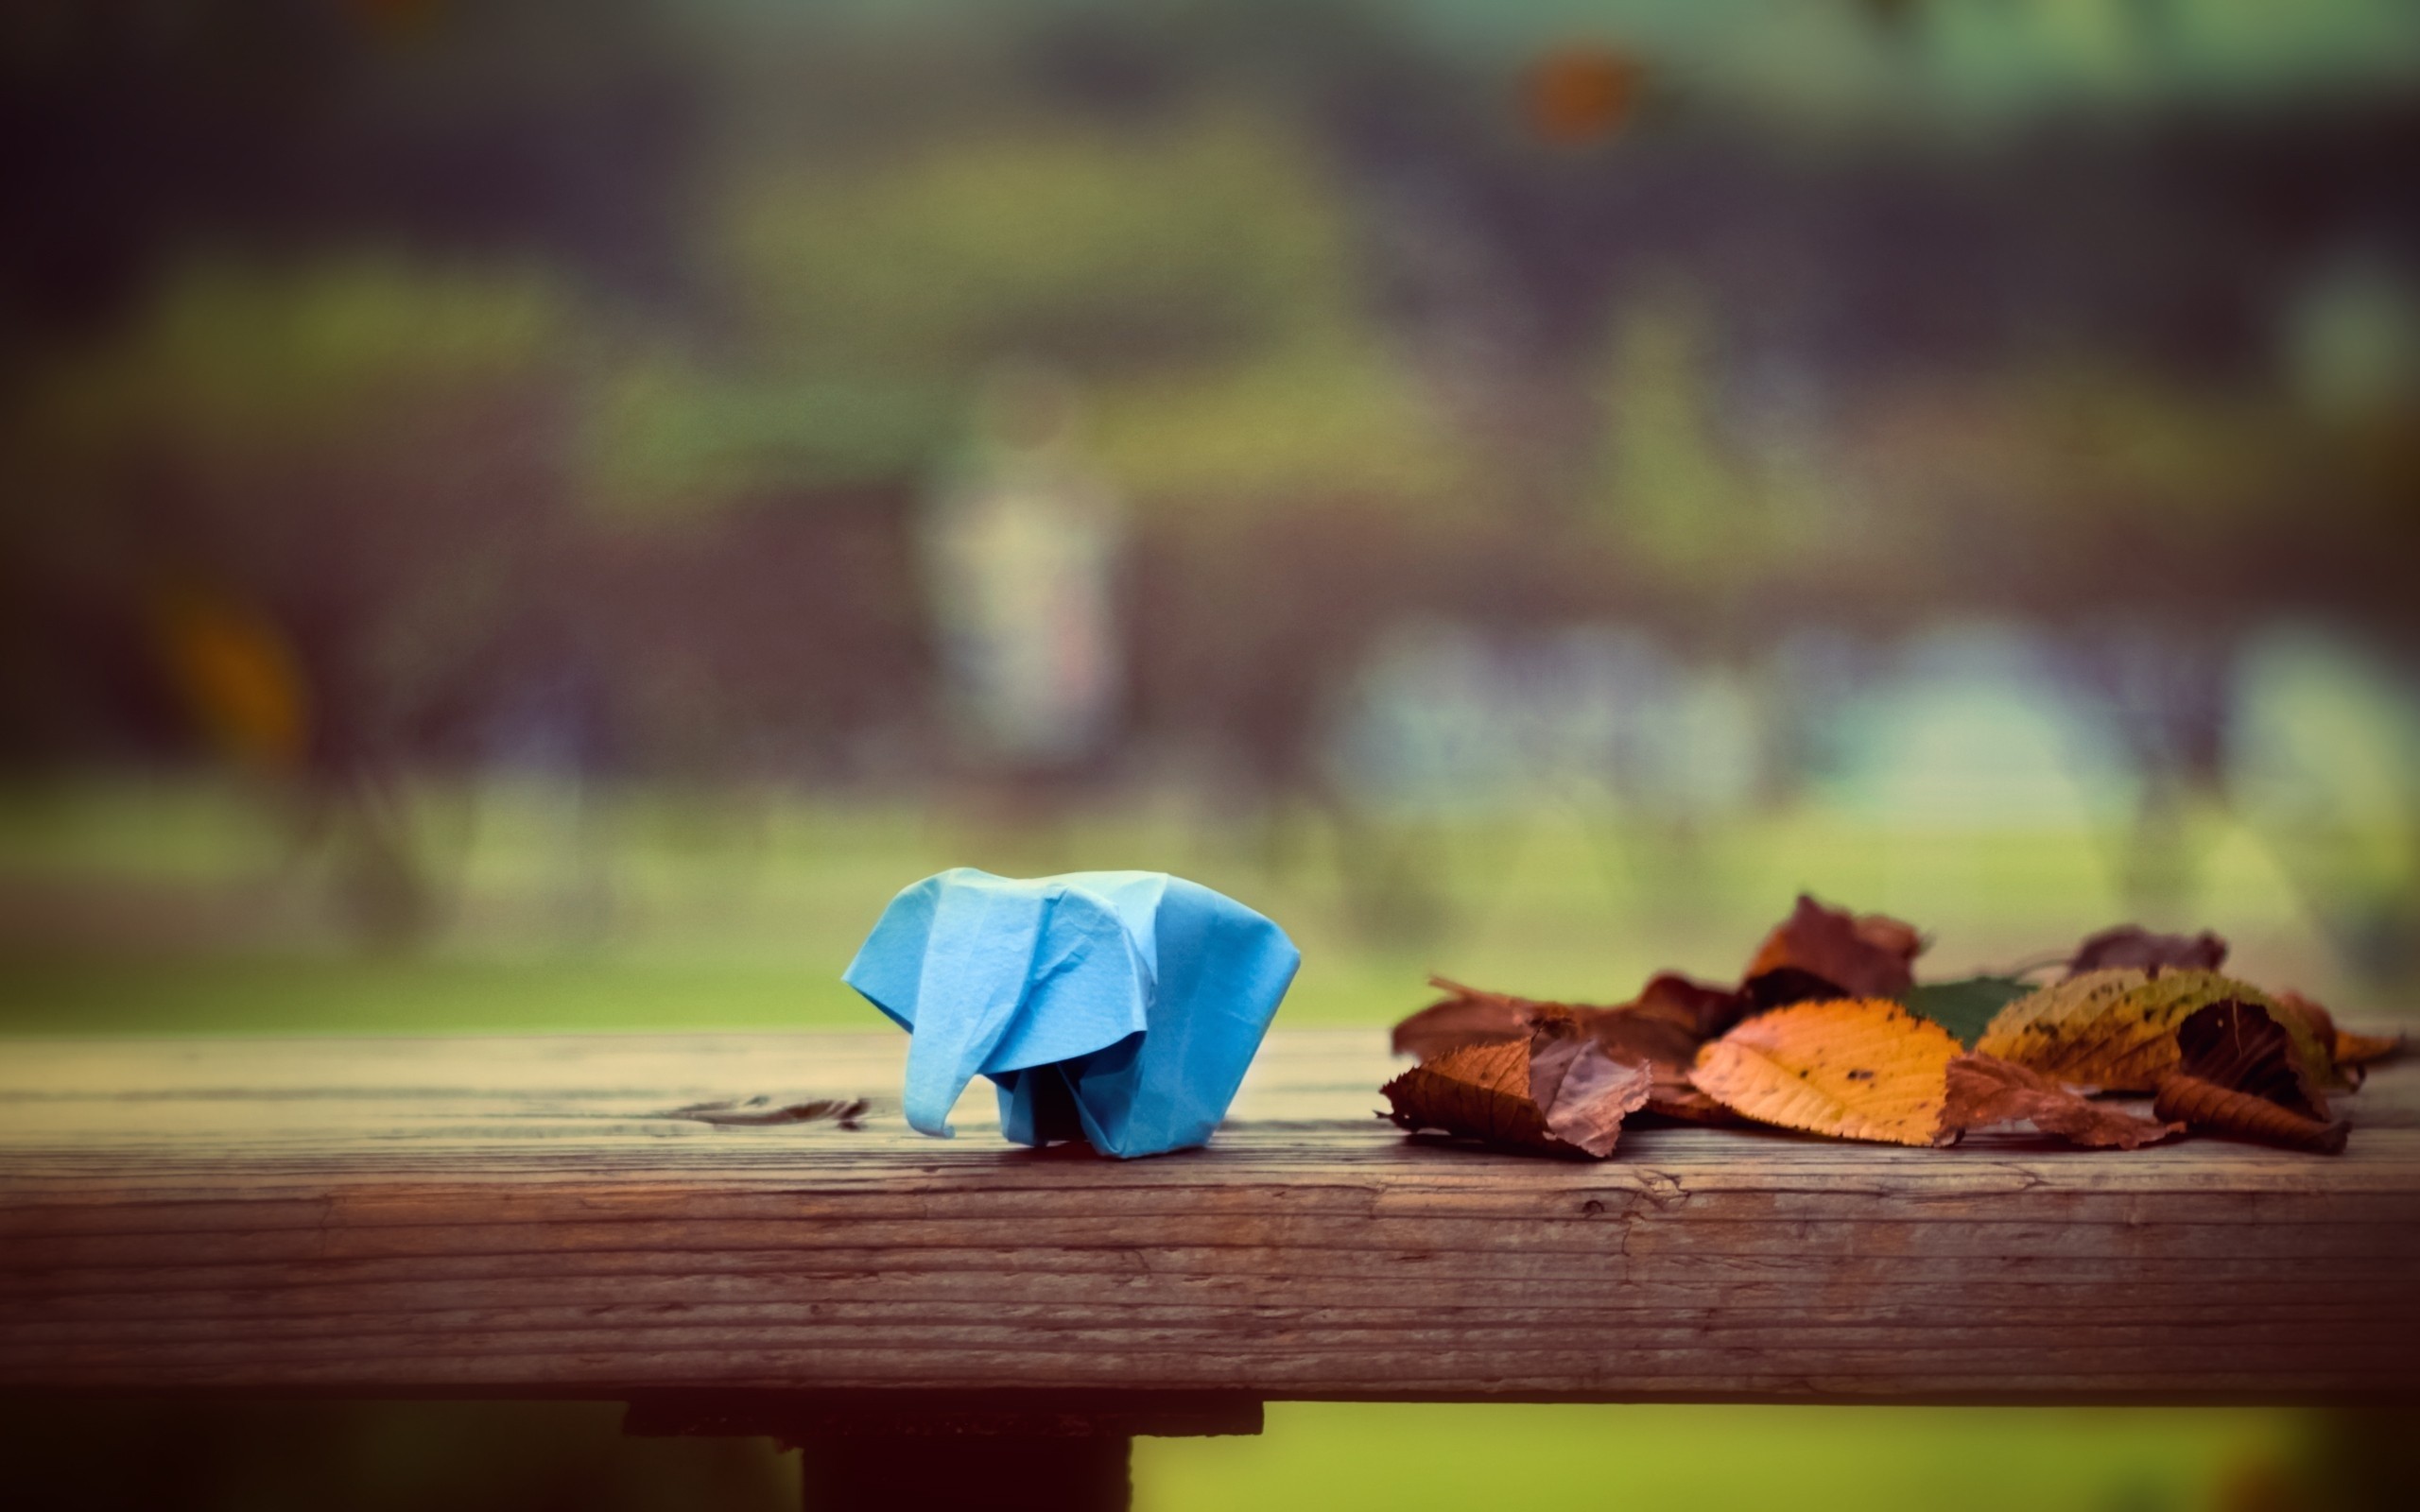 General 2560x1600 leaves fall depth of field animals origami elephant table trees park wood